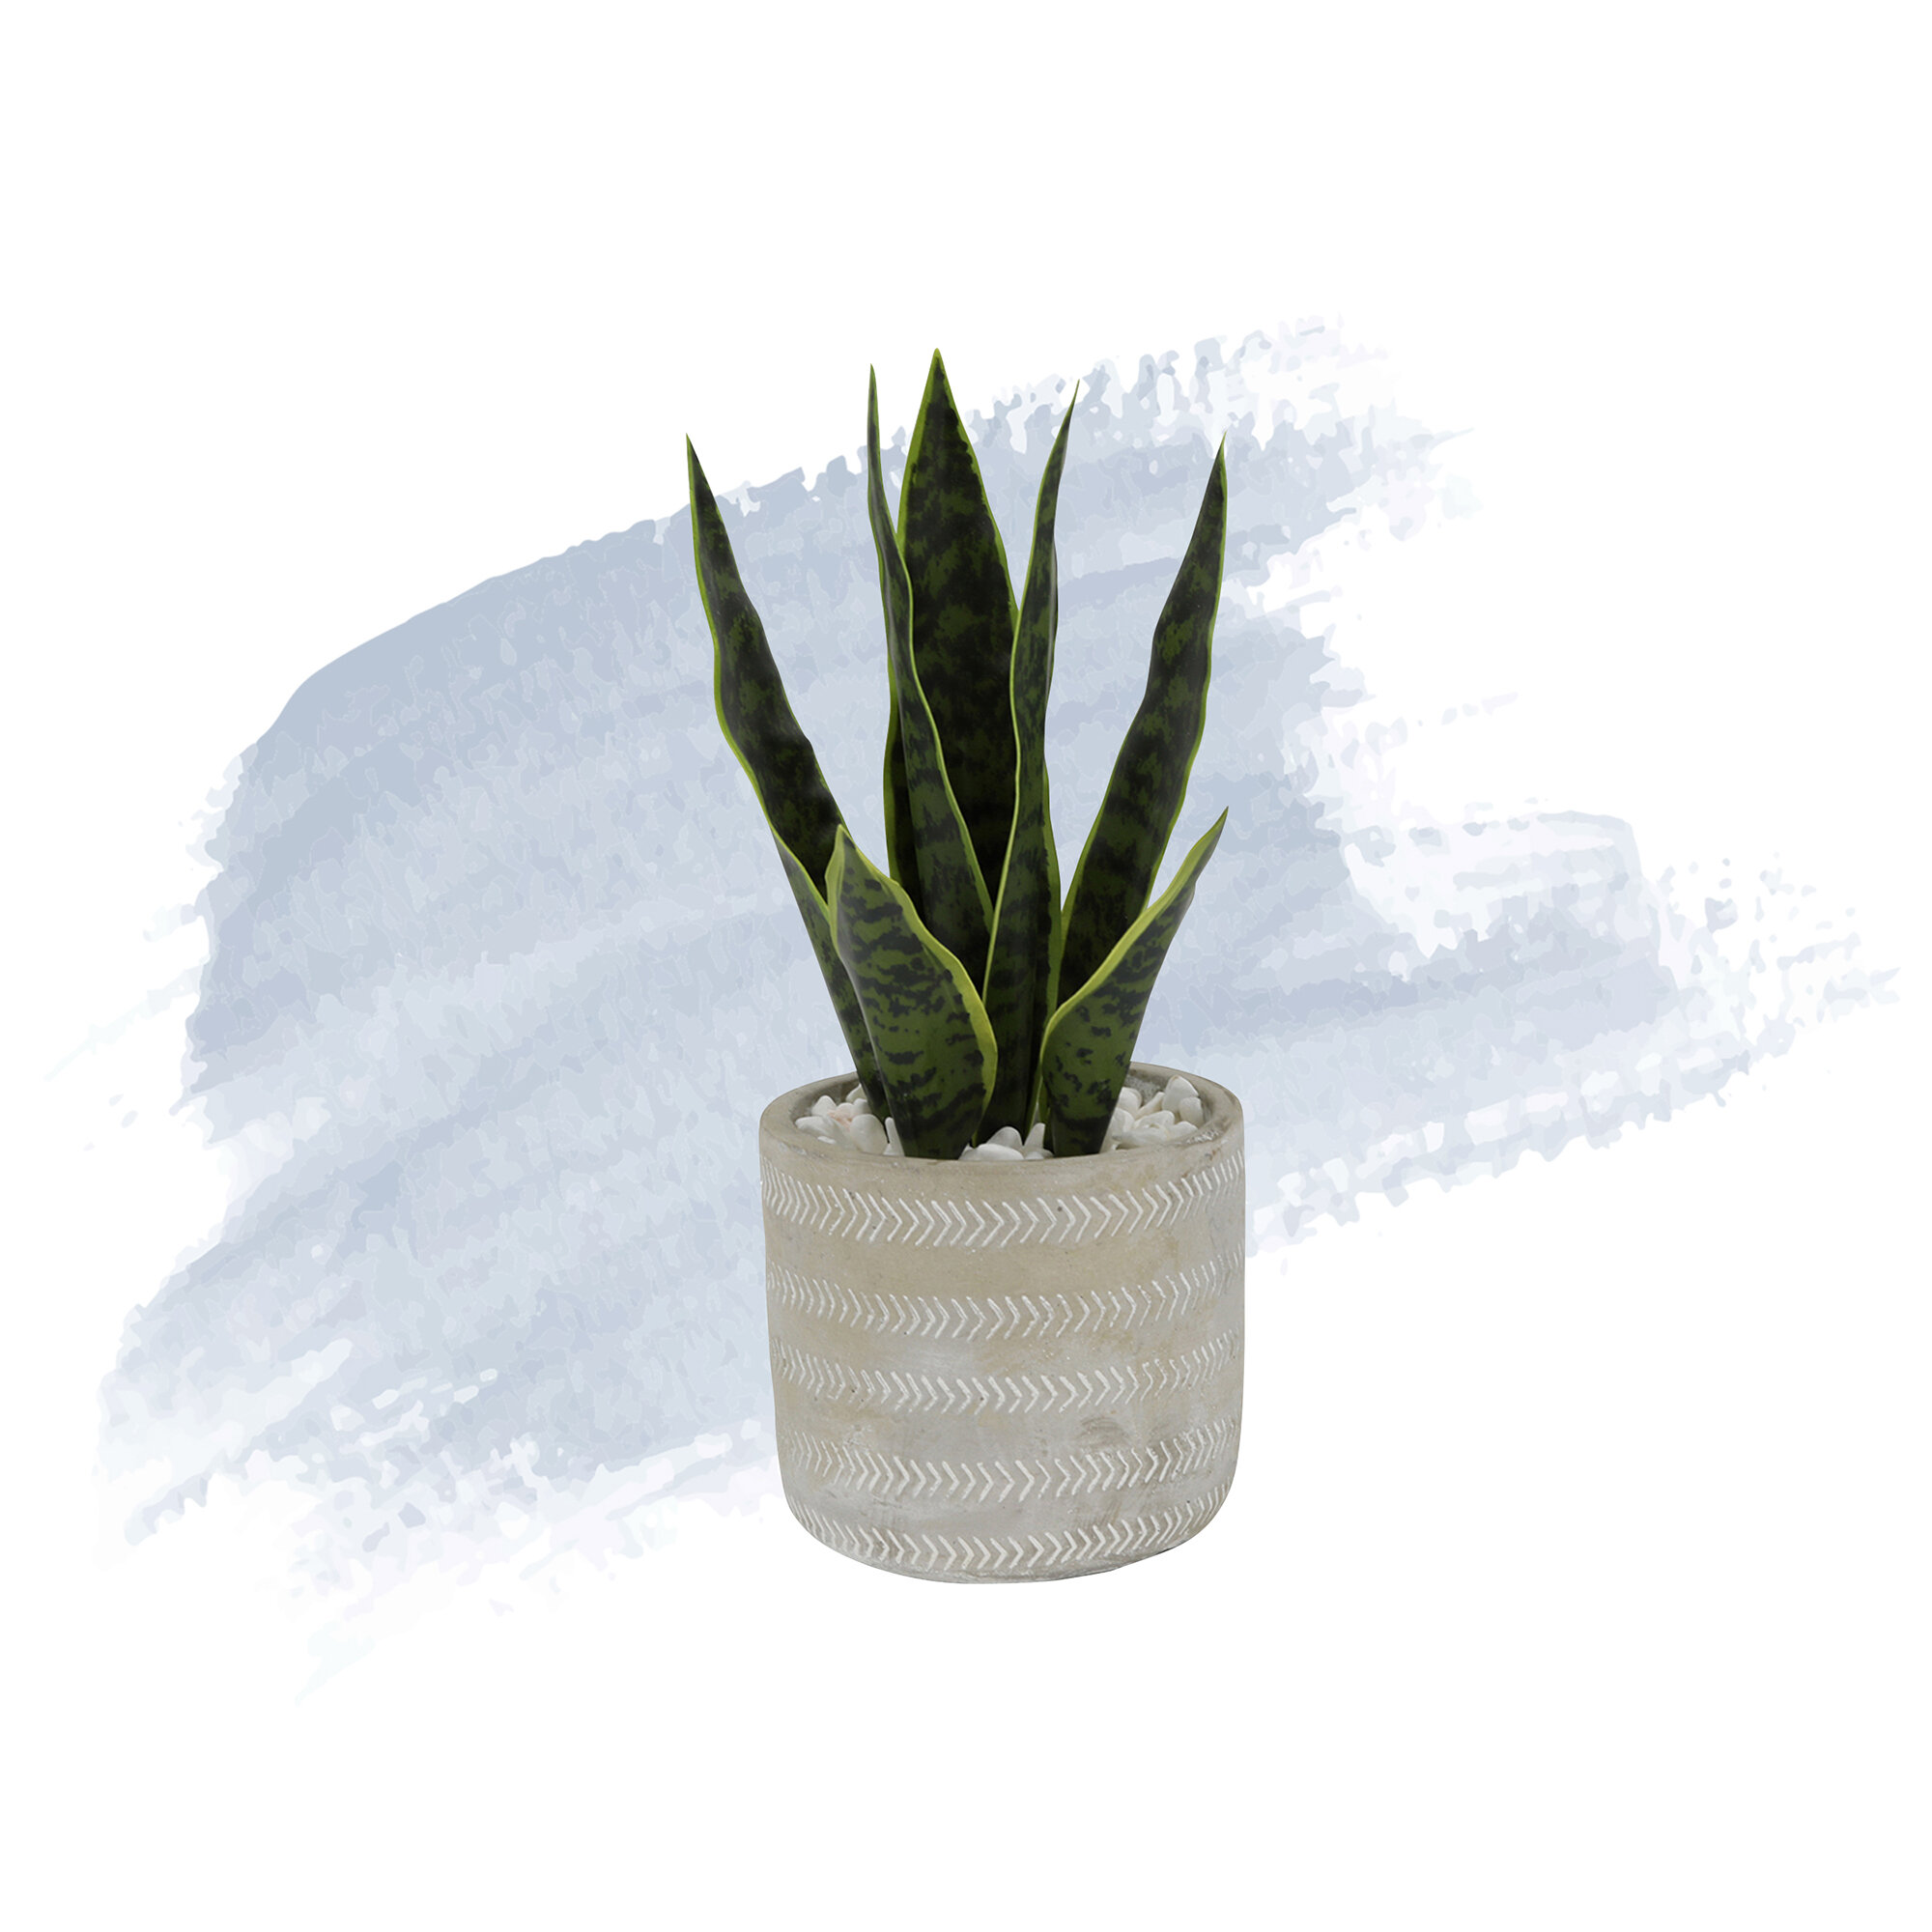 summer flower 23 Snake Plant Artificial Leaves Set, 21pcs Faux Sansevieria  Plant Leaf,Tall Fake Snake Plants Outdoor,4 Sizes for Indoor Home